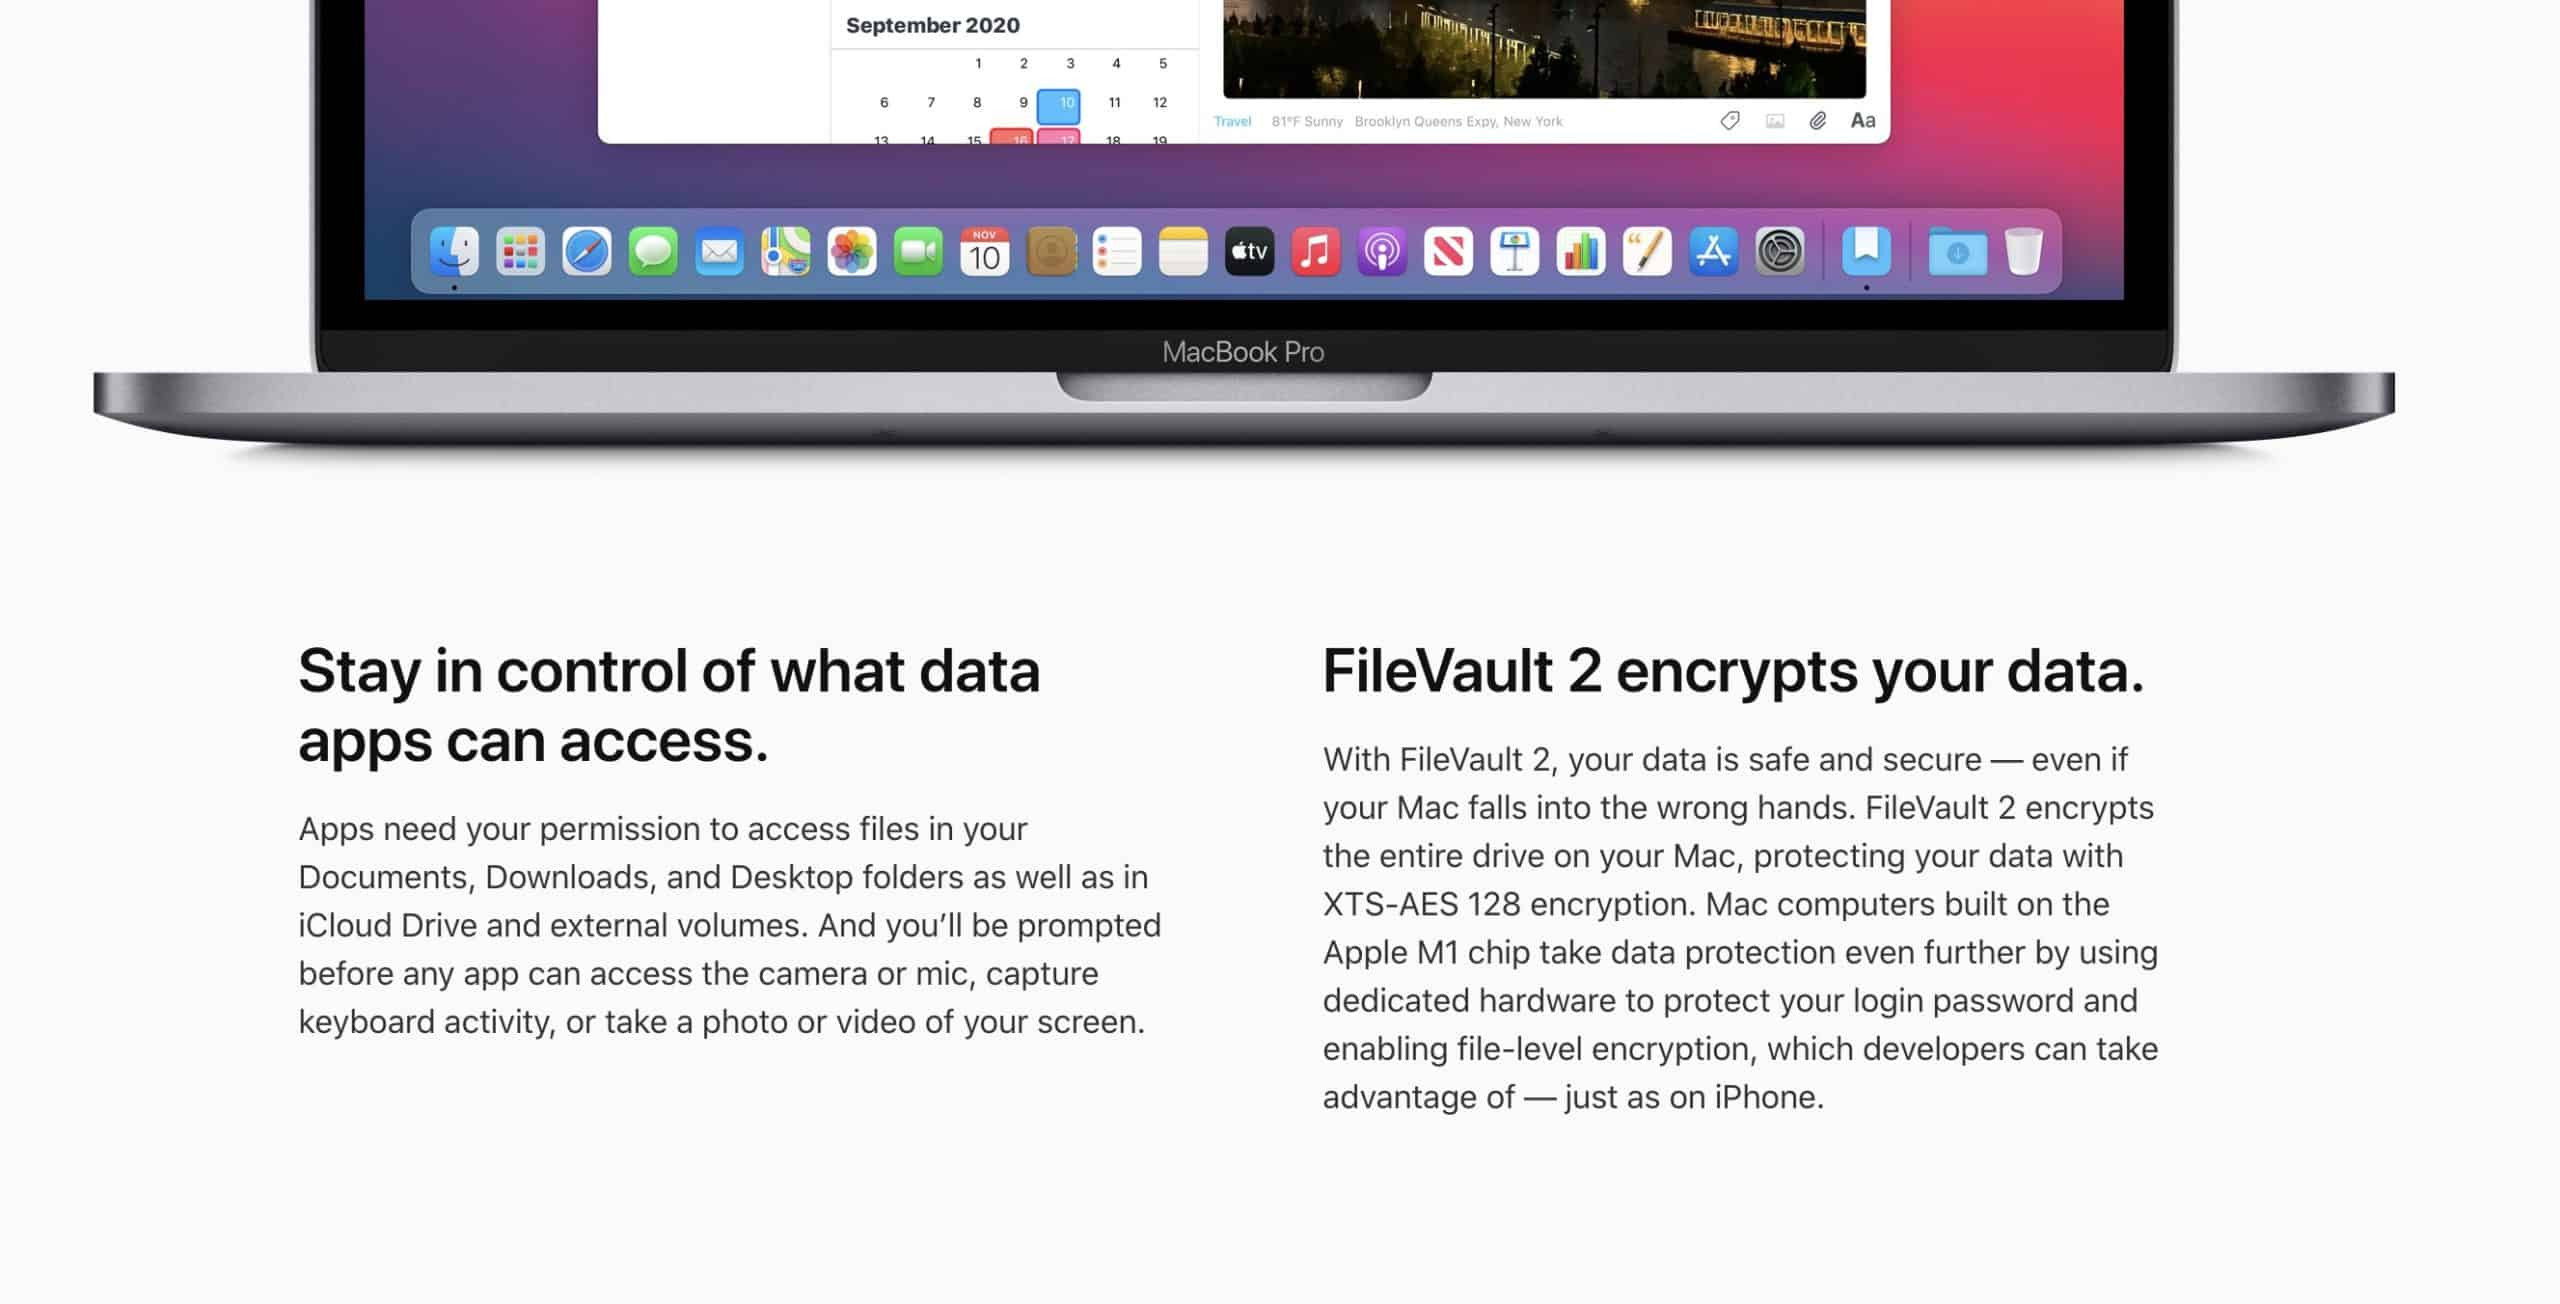 How to scan for a virus on the Mac